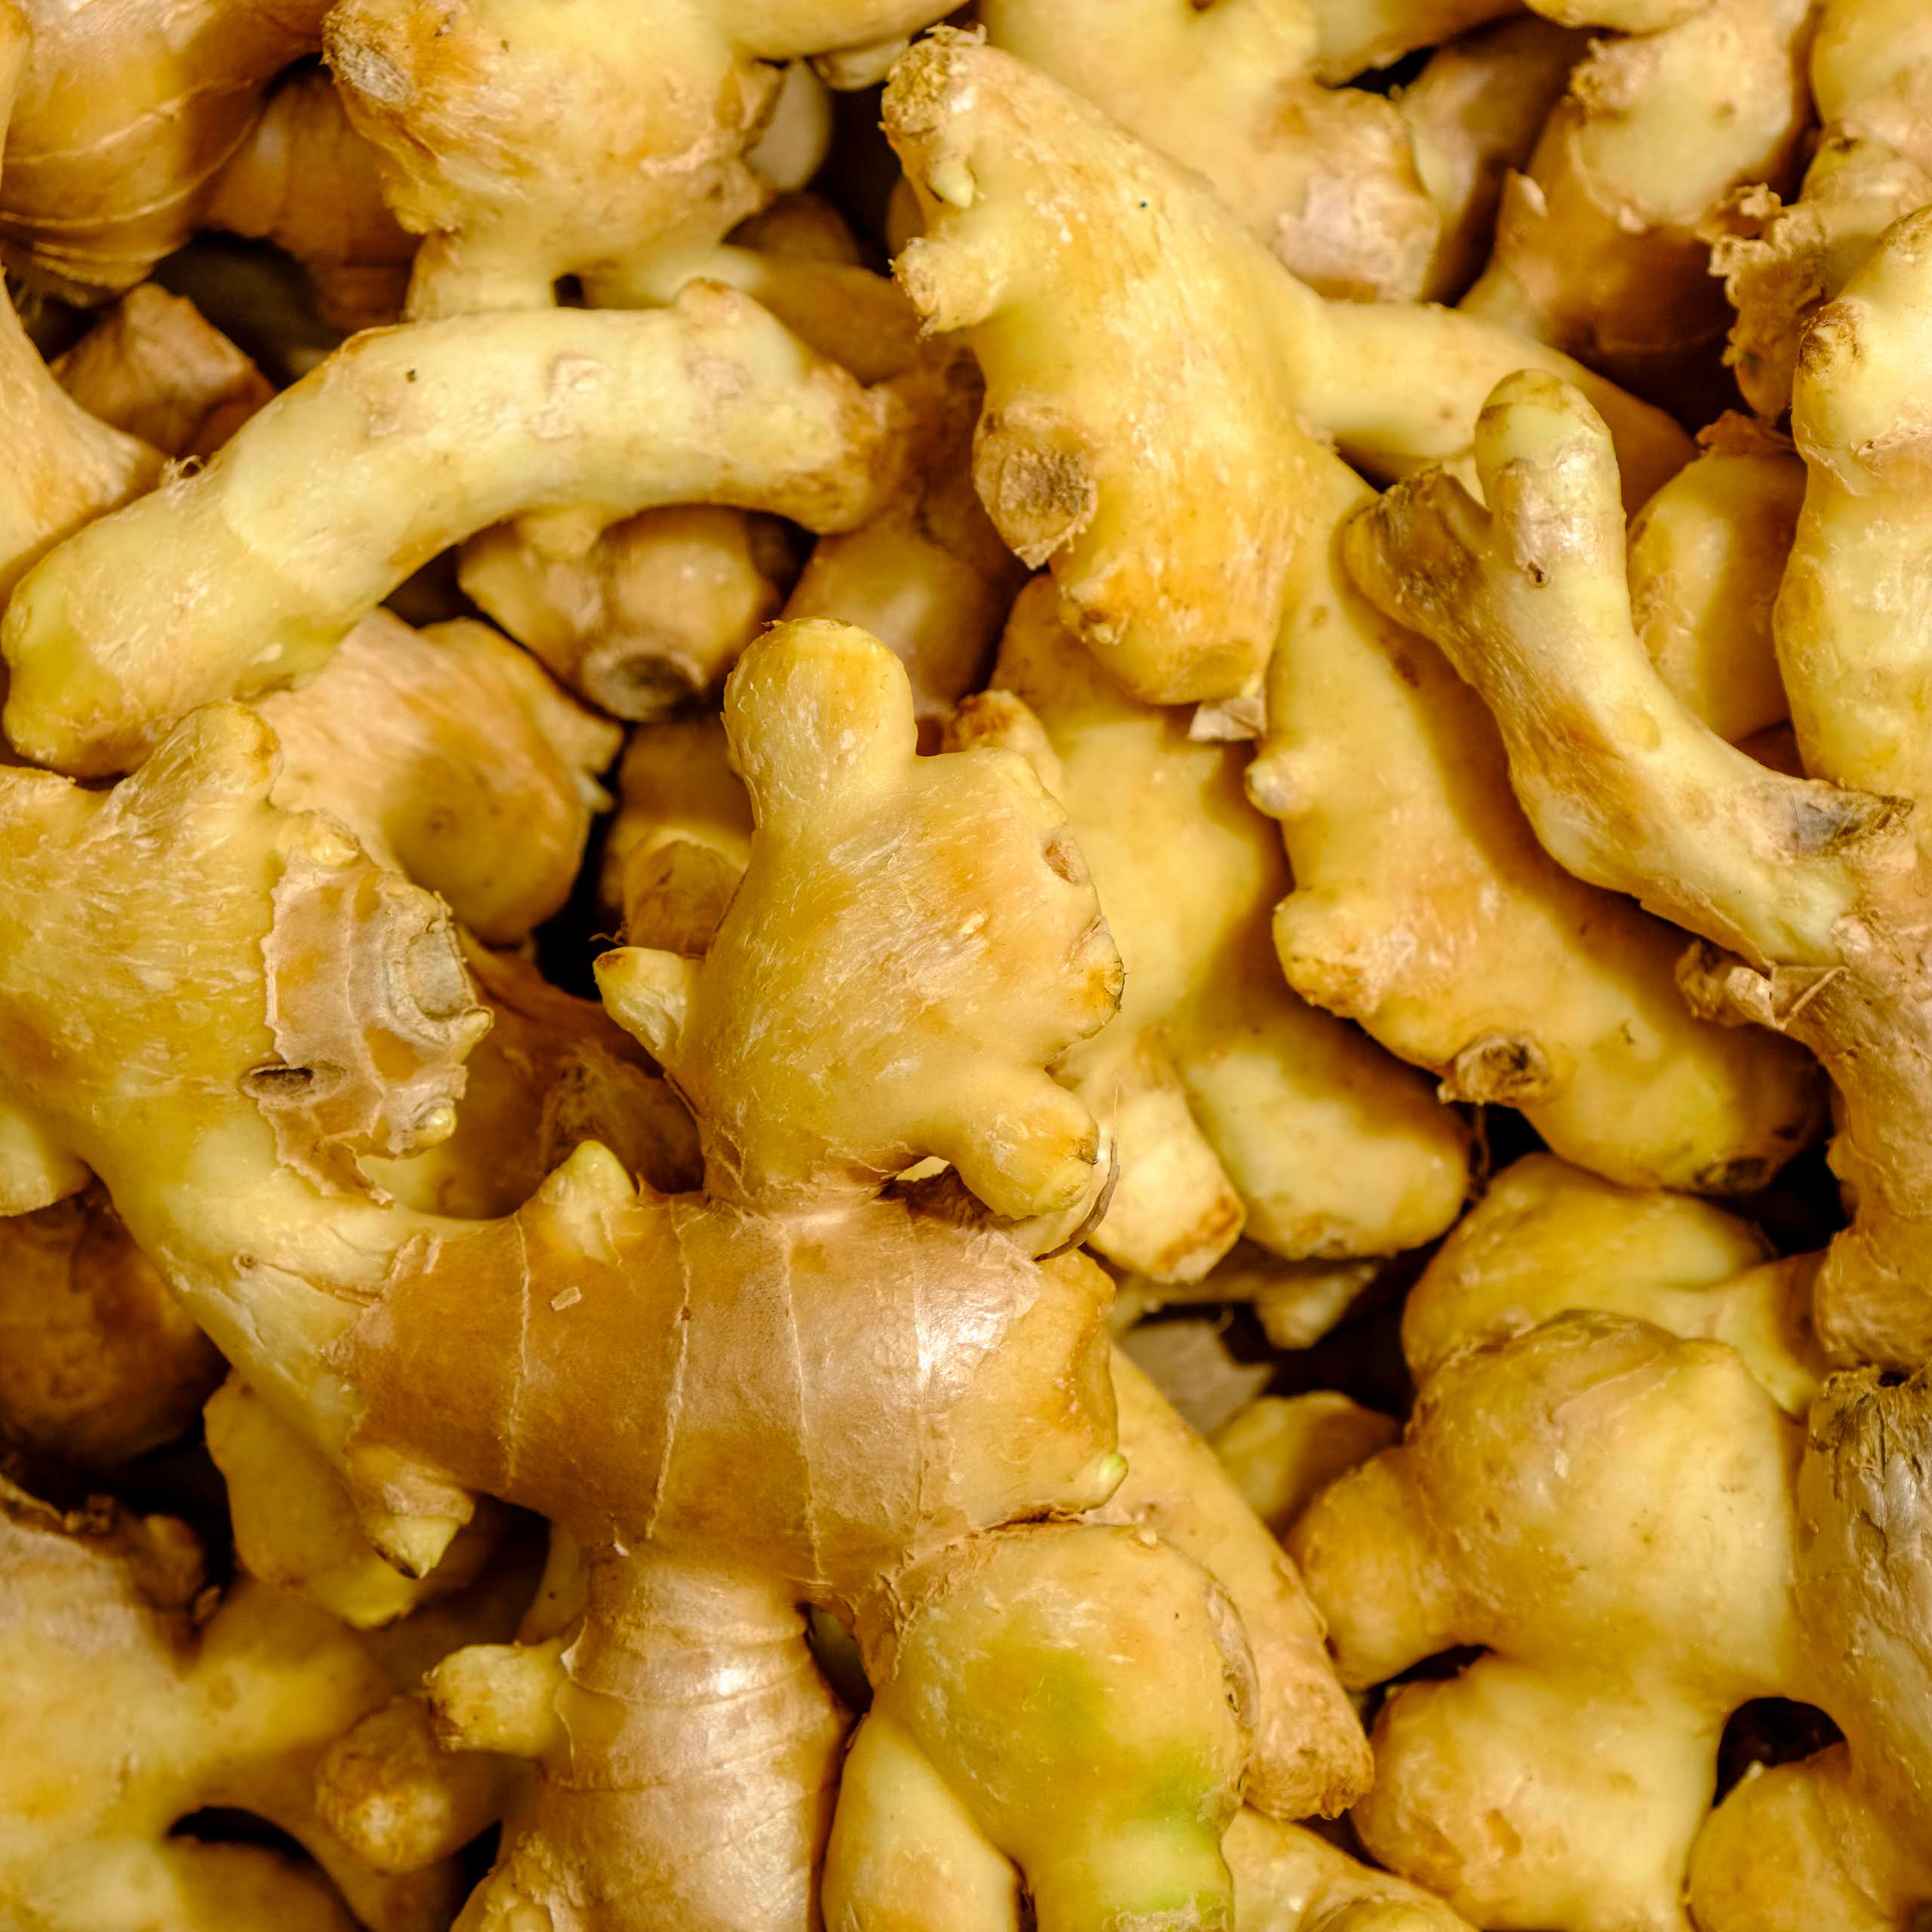 Ginger roots on display